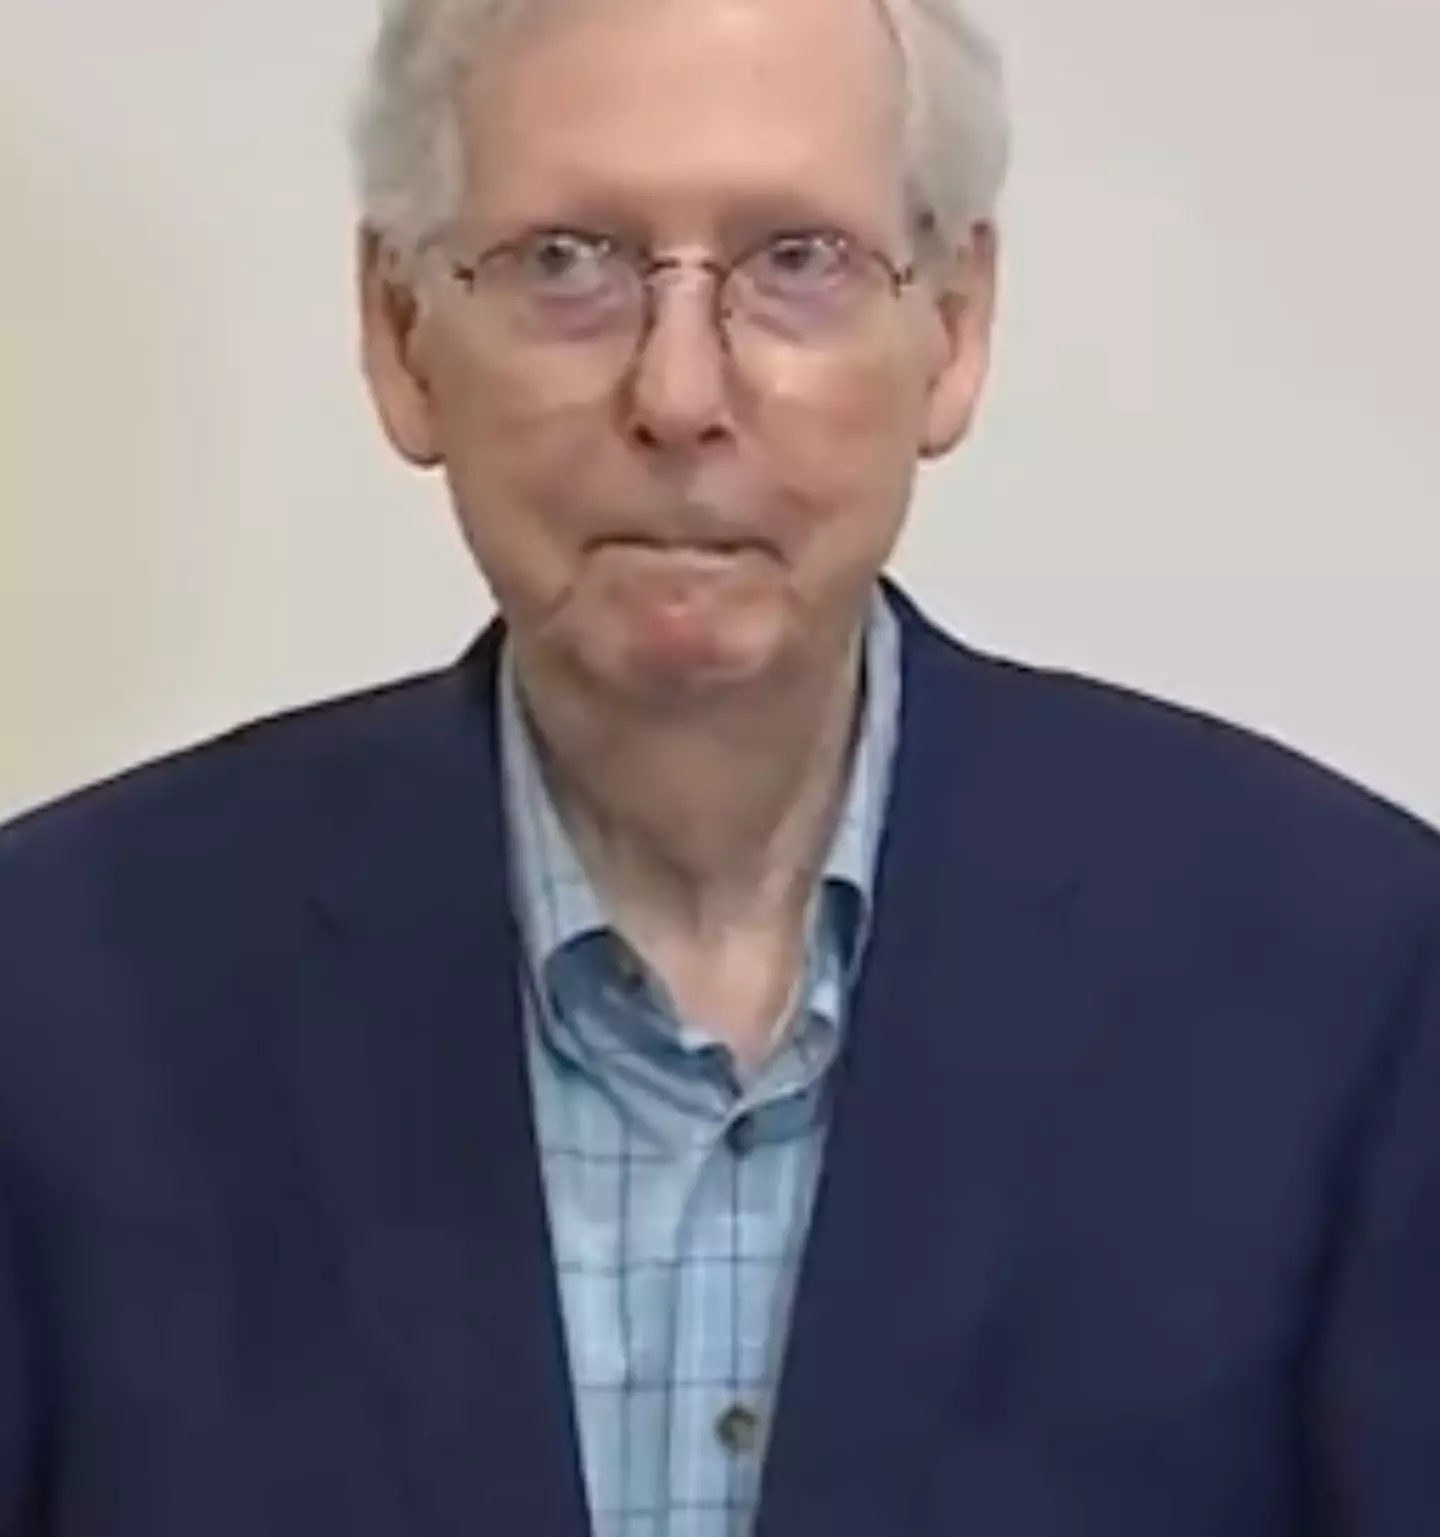 Mitch McConnell froze during another press conference.